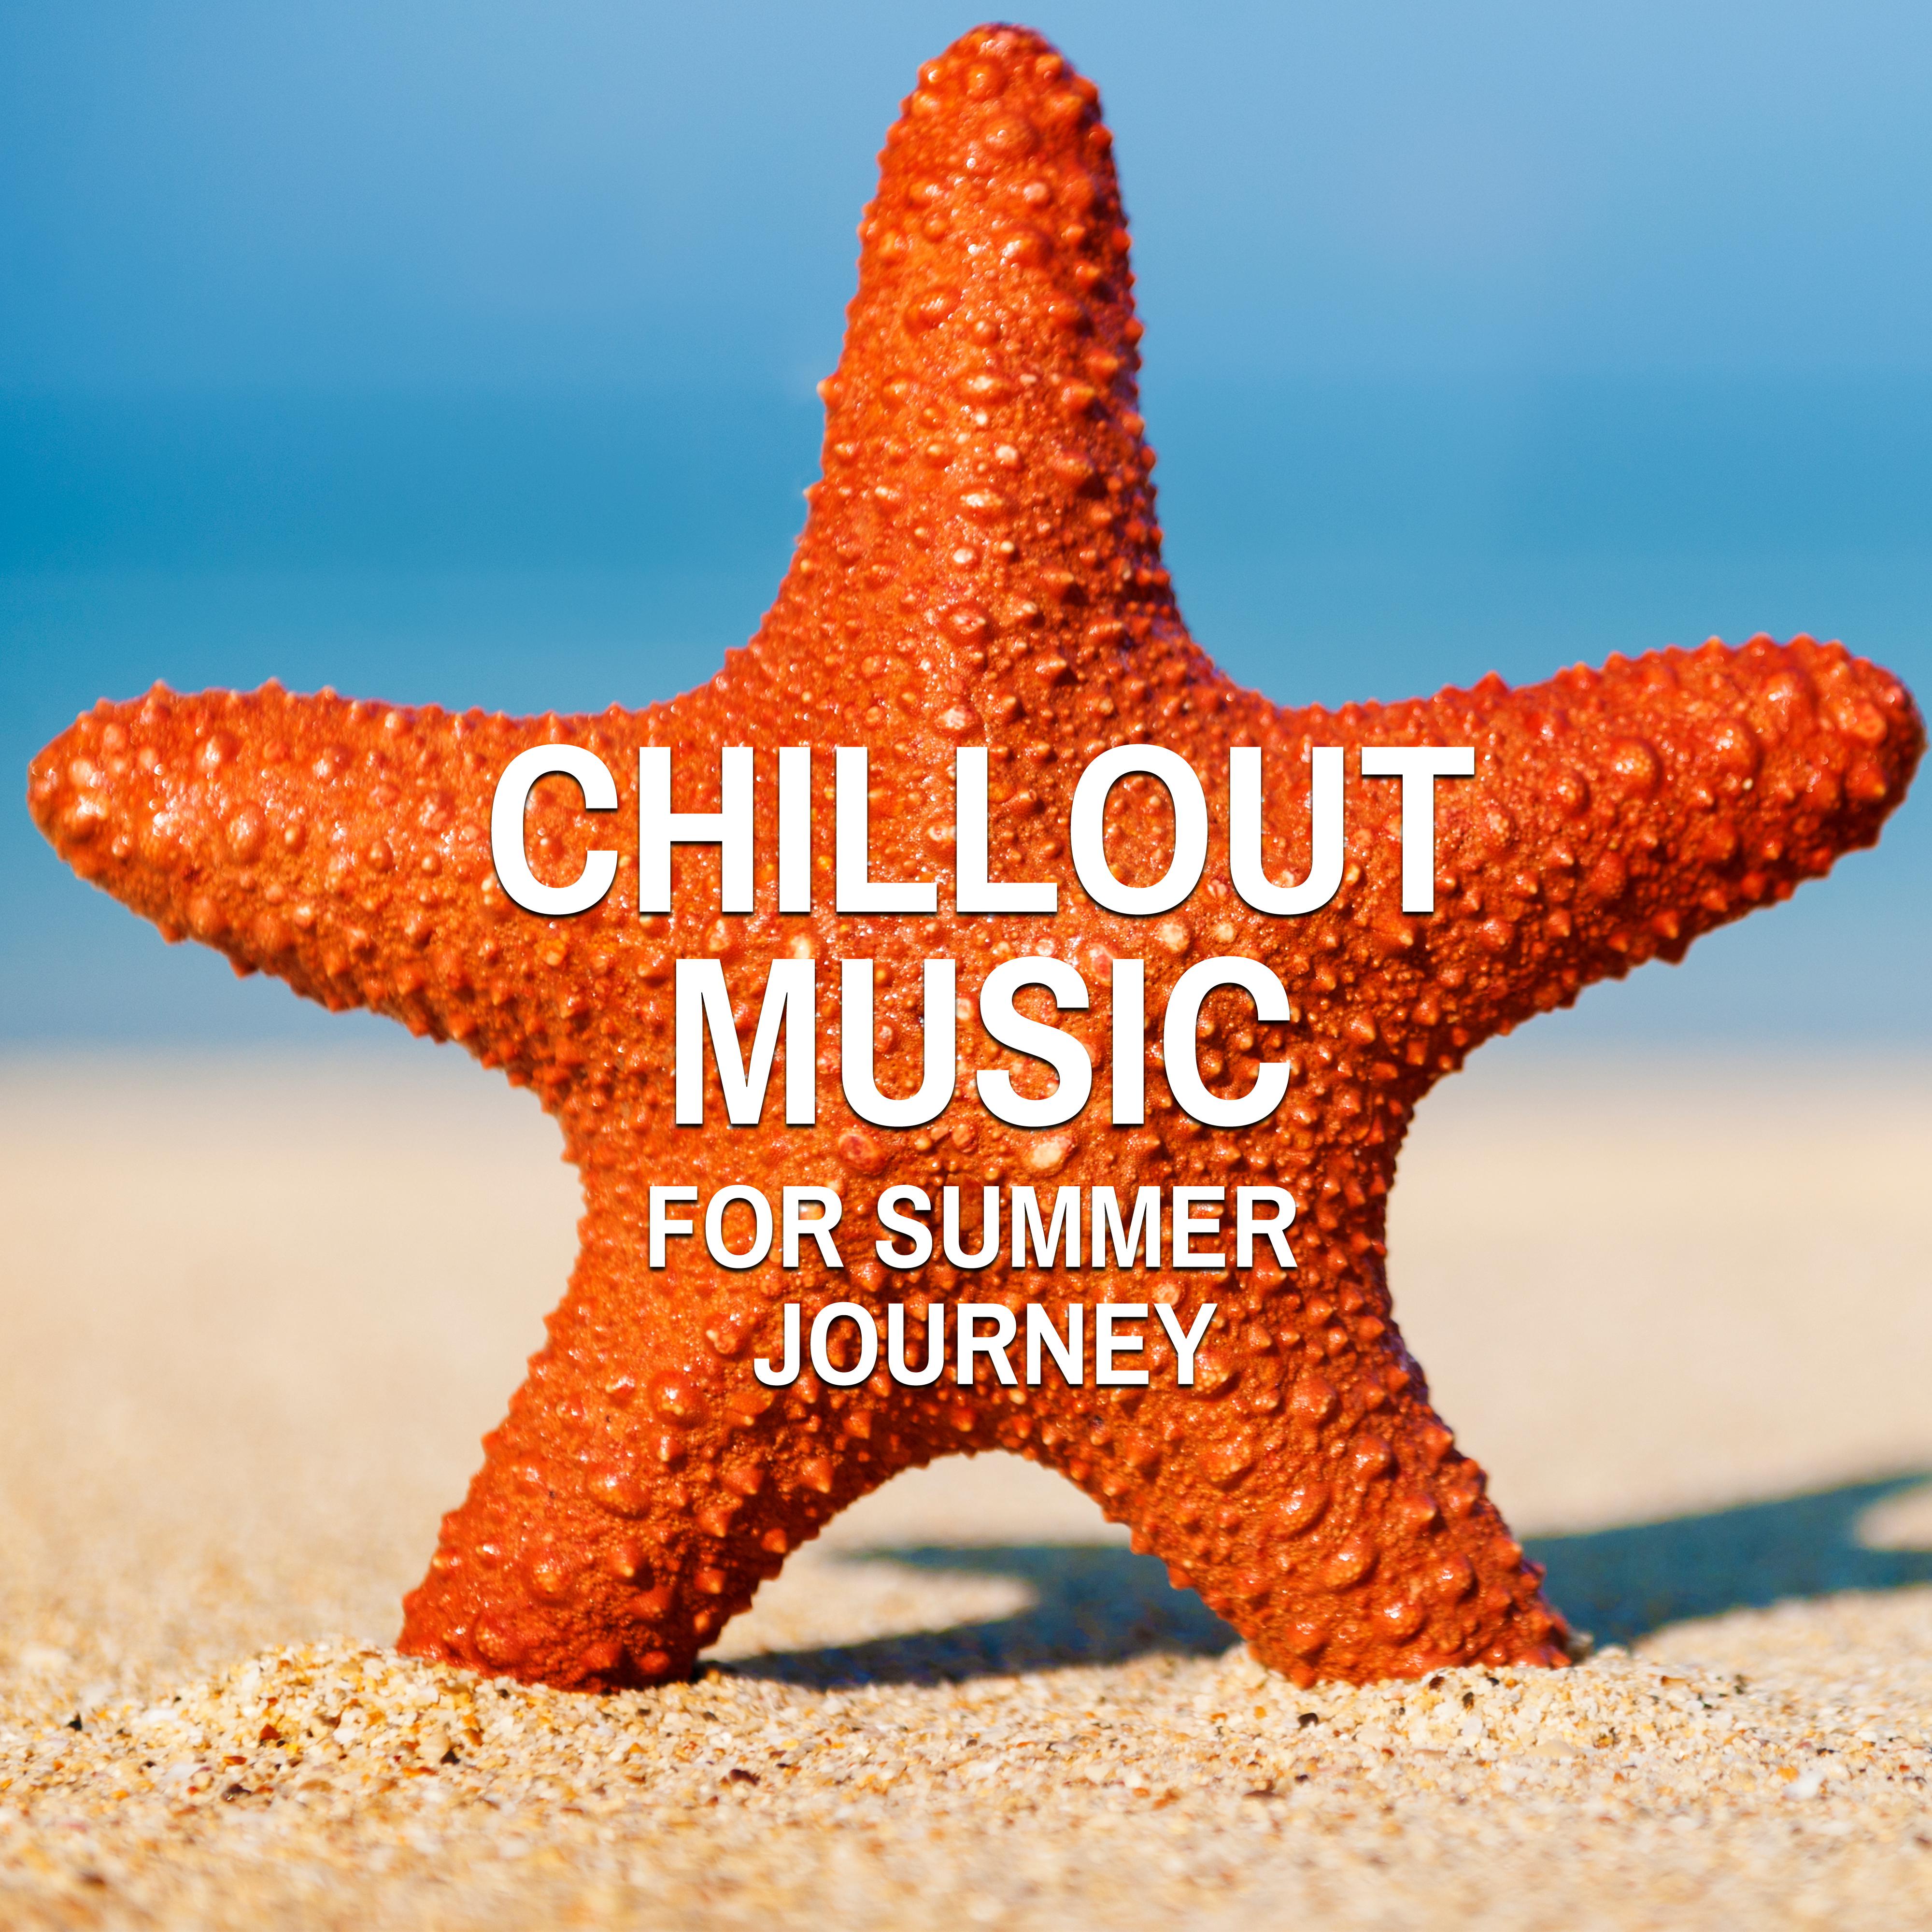 Chillout Music for Summer Journey